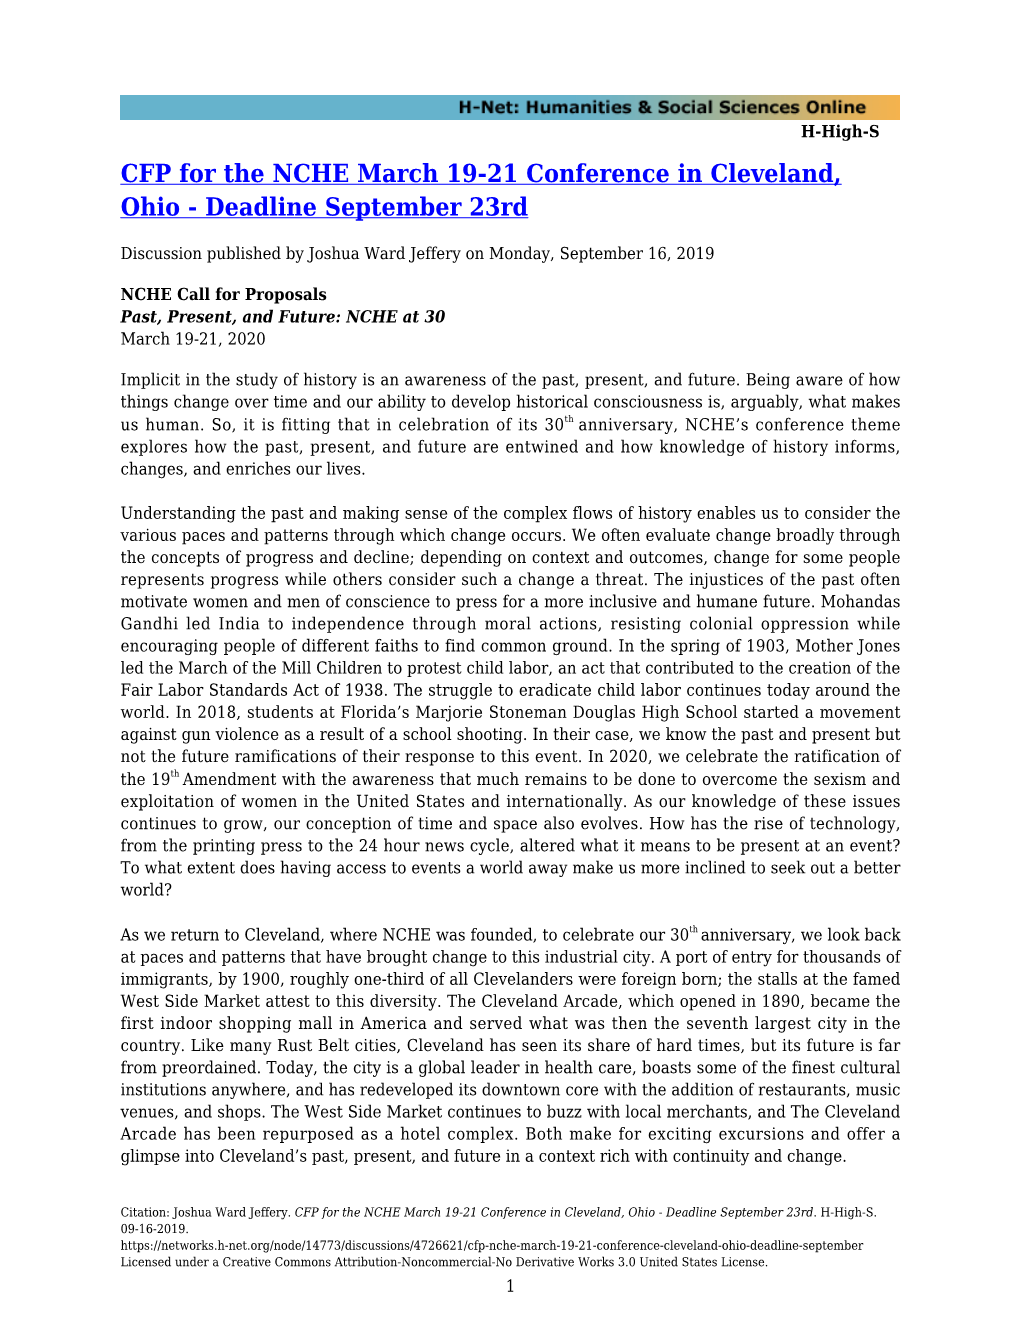 CFP for the NCHE March 19-21 Conference in Cleveland, Ohio - Deadline September 23Rd